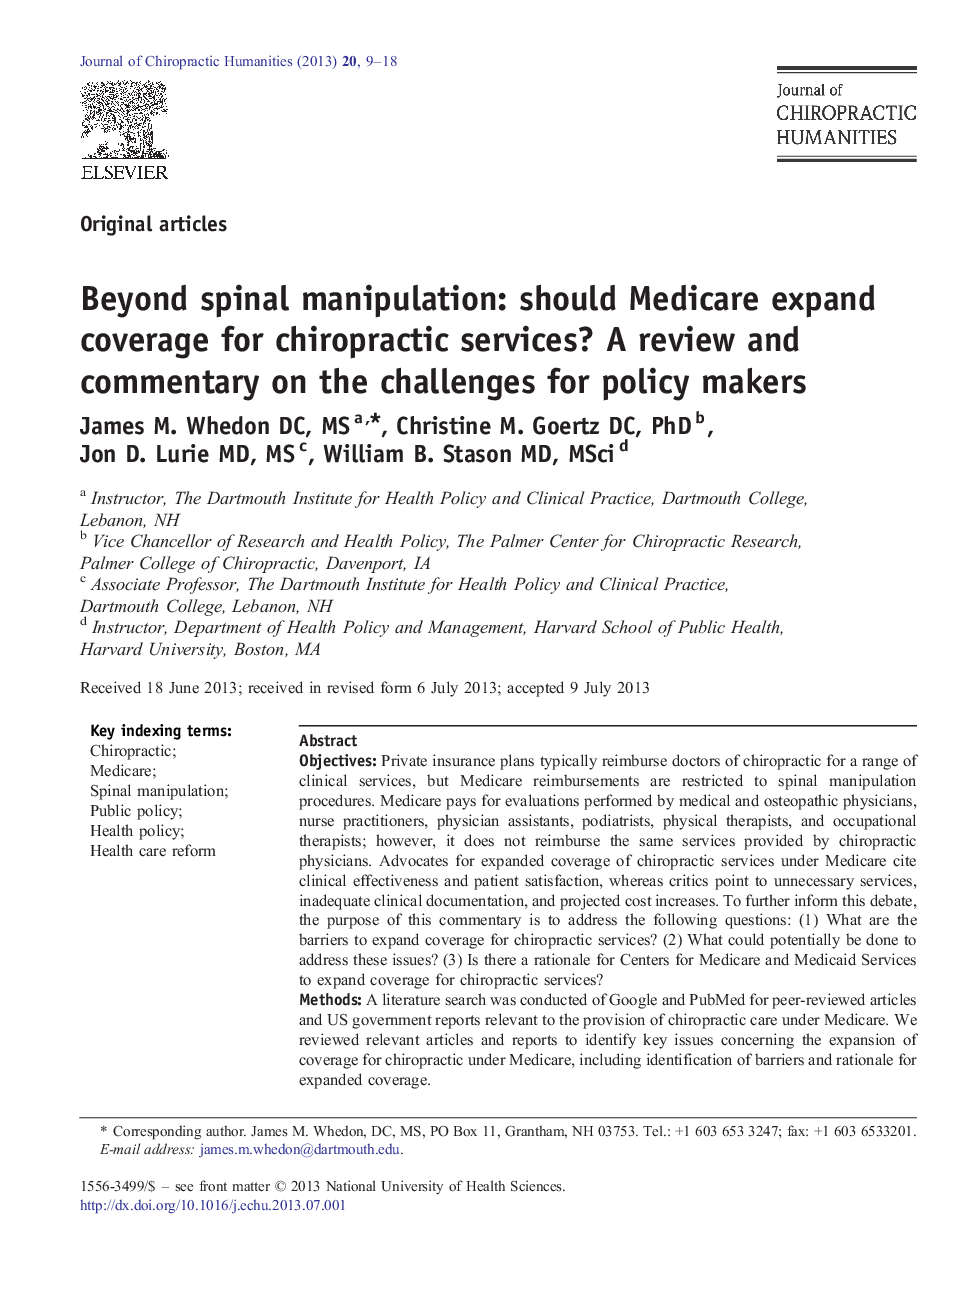 Beyond spinal manipulation: should Medicare expand coverage for chiropractic services? A review and commentary on the challenges for policy makers